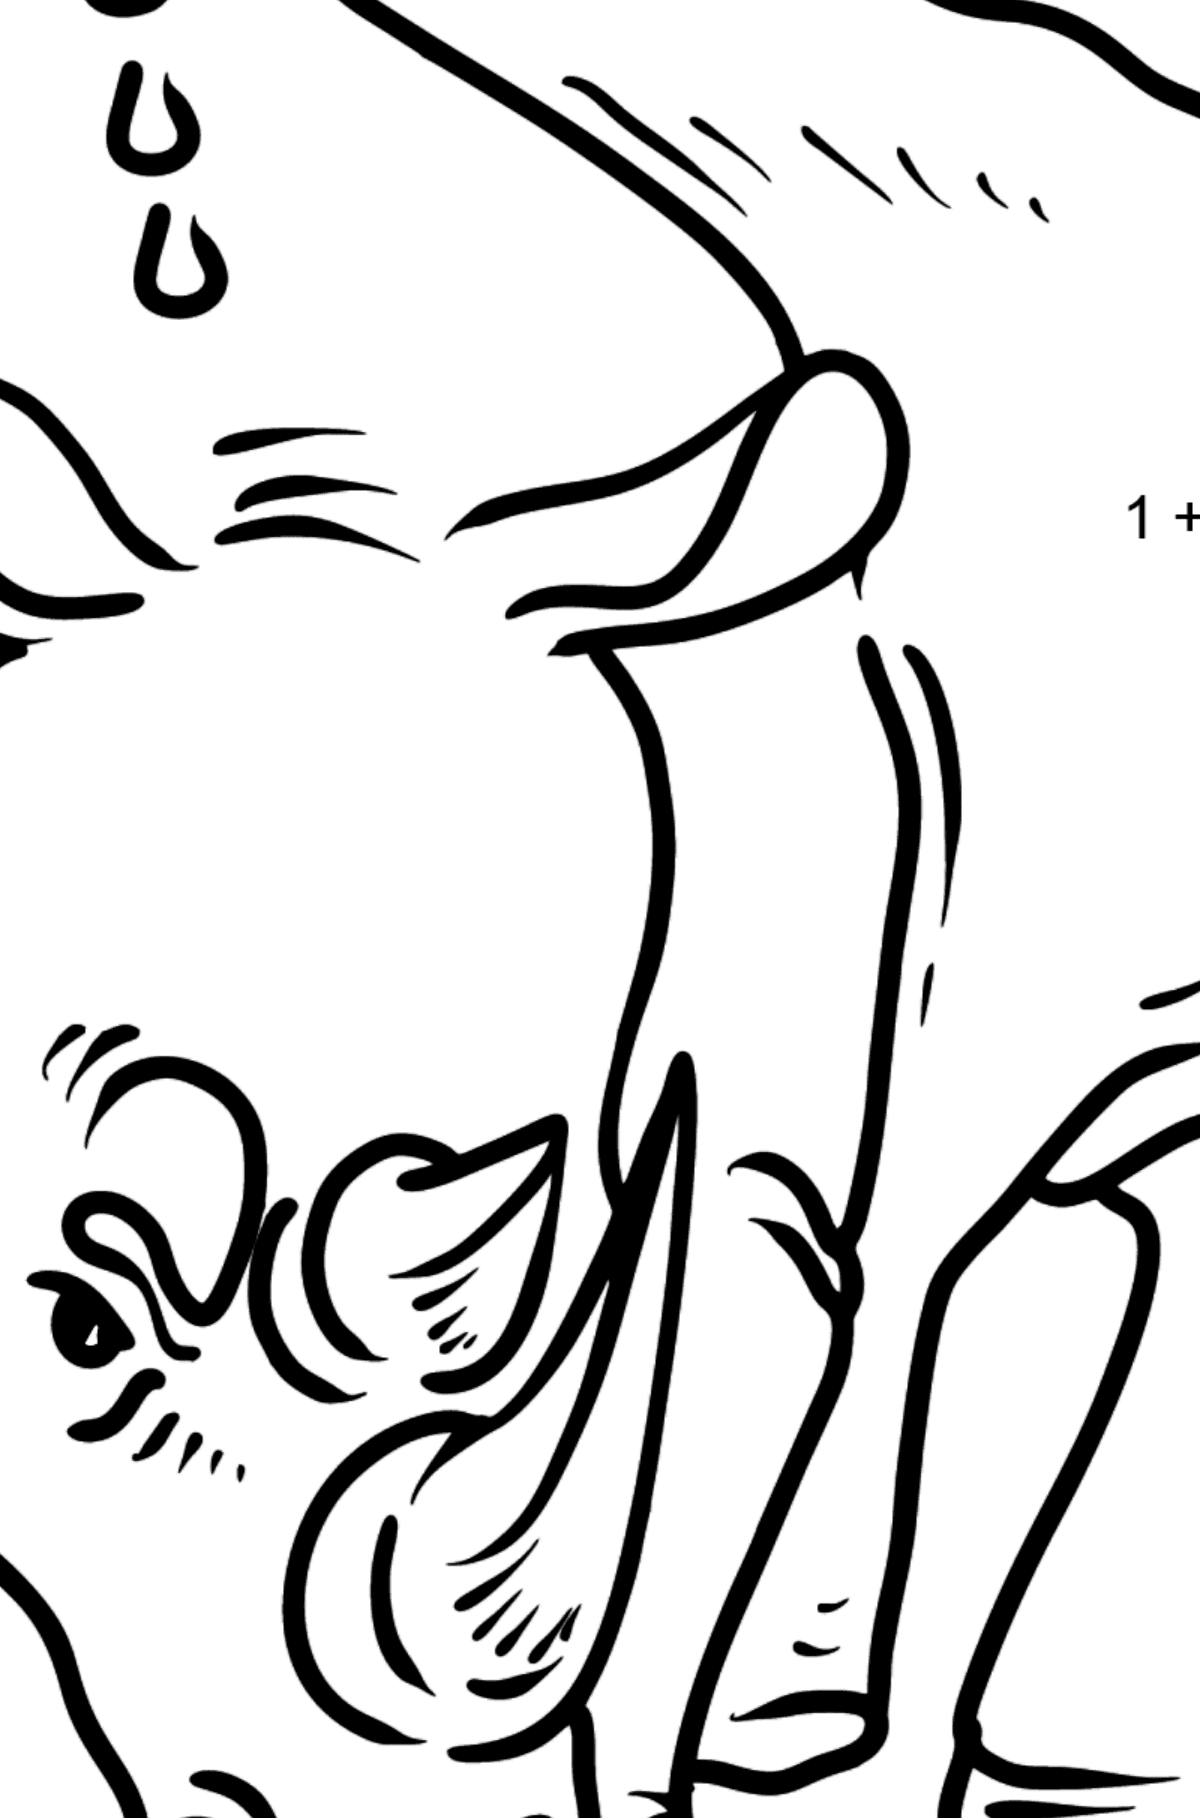 Rhino coloring page - Math Coloring - Addition for Kids